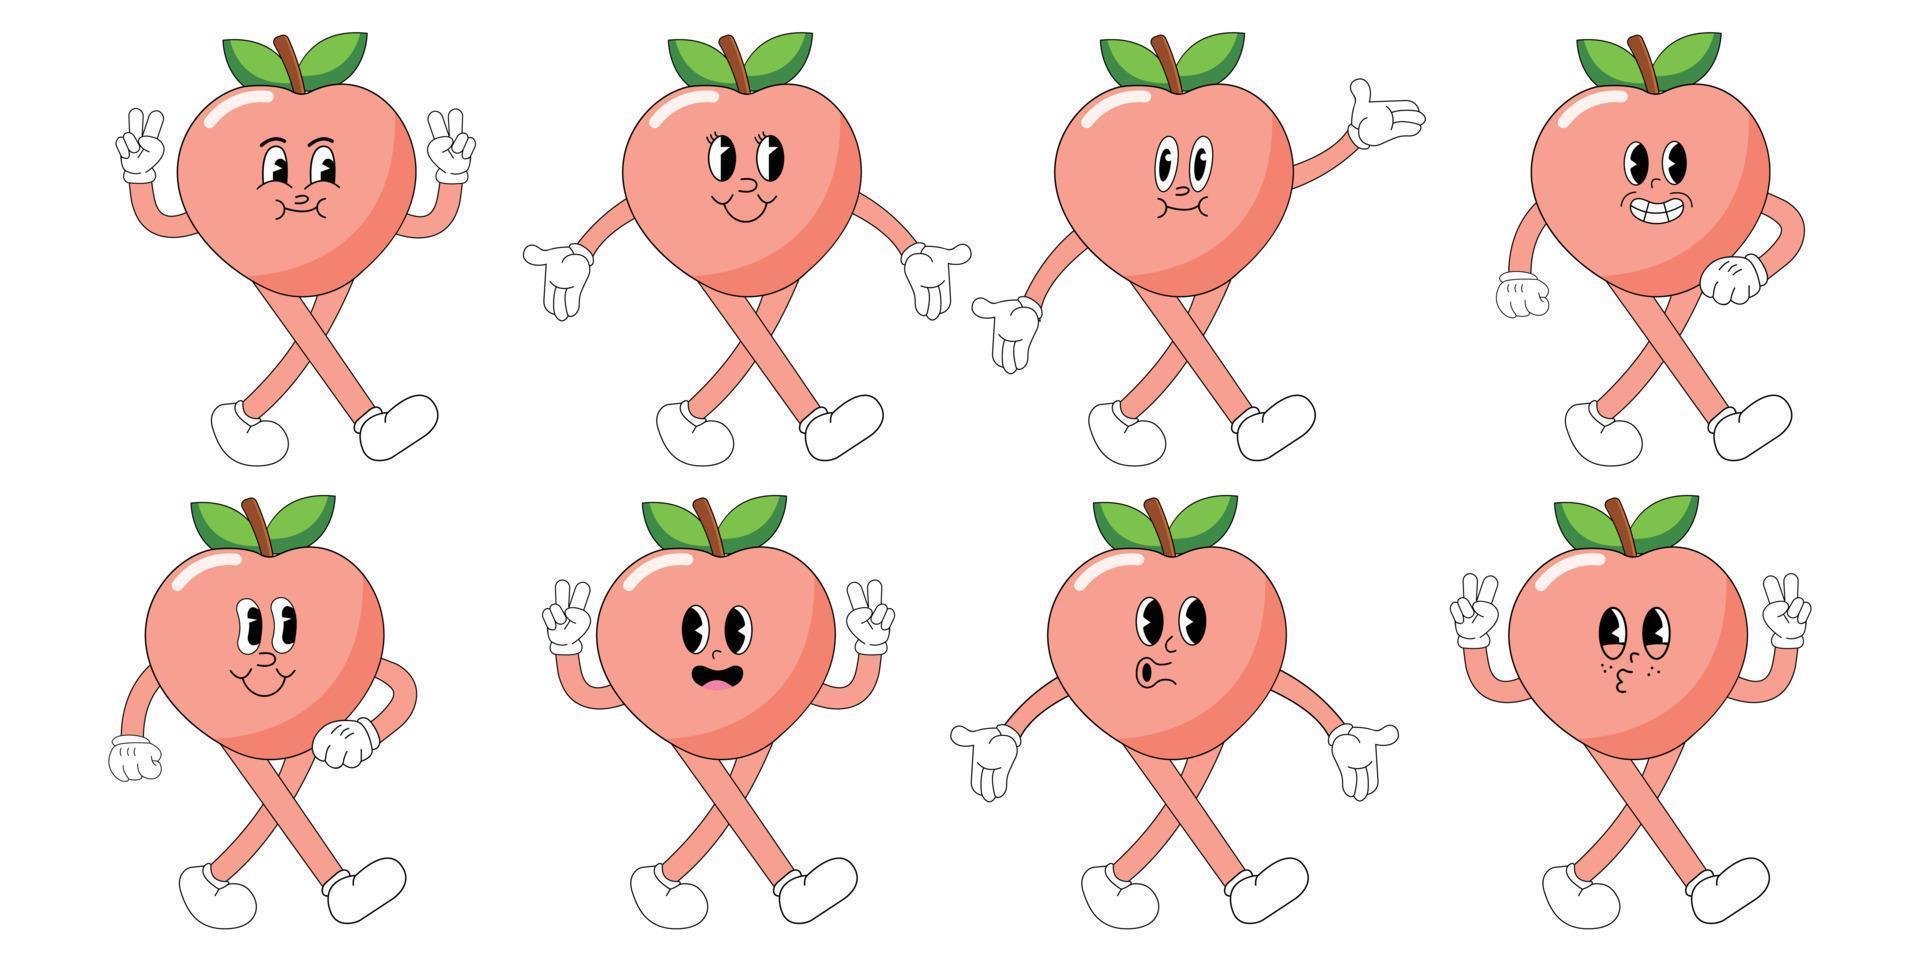 A Set of peach cartoon groovy stickers with funny comic characters, gloved hands. Modern illustration with legs and arms. vector